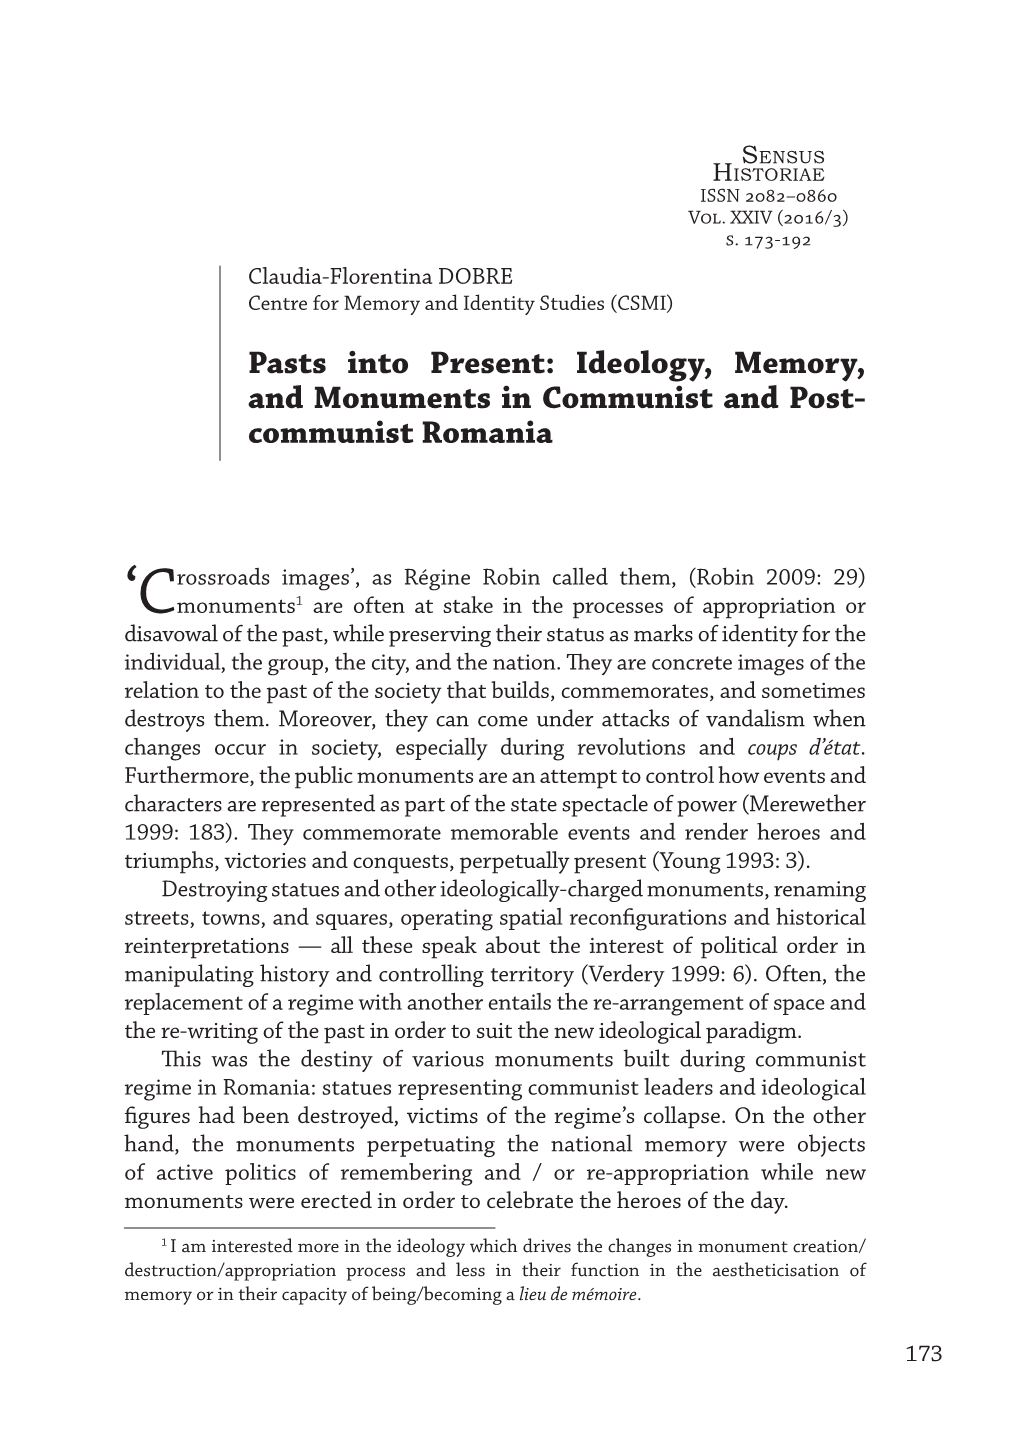 Pasts Into Present: Ideology, Memory, and Monuments in Communist and Post- Communist Romania